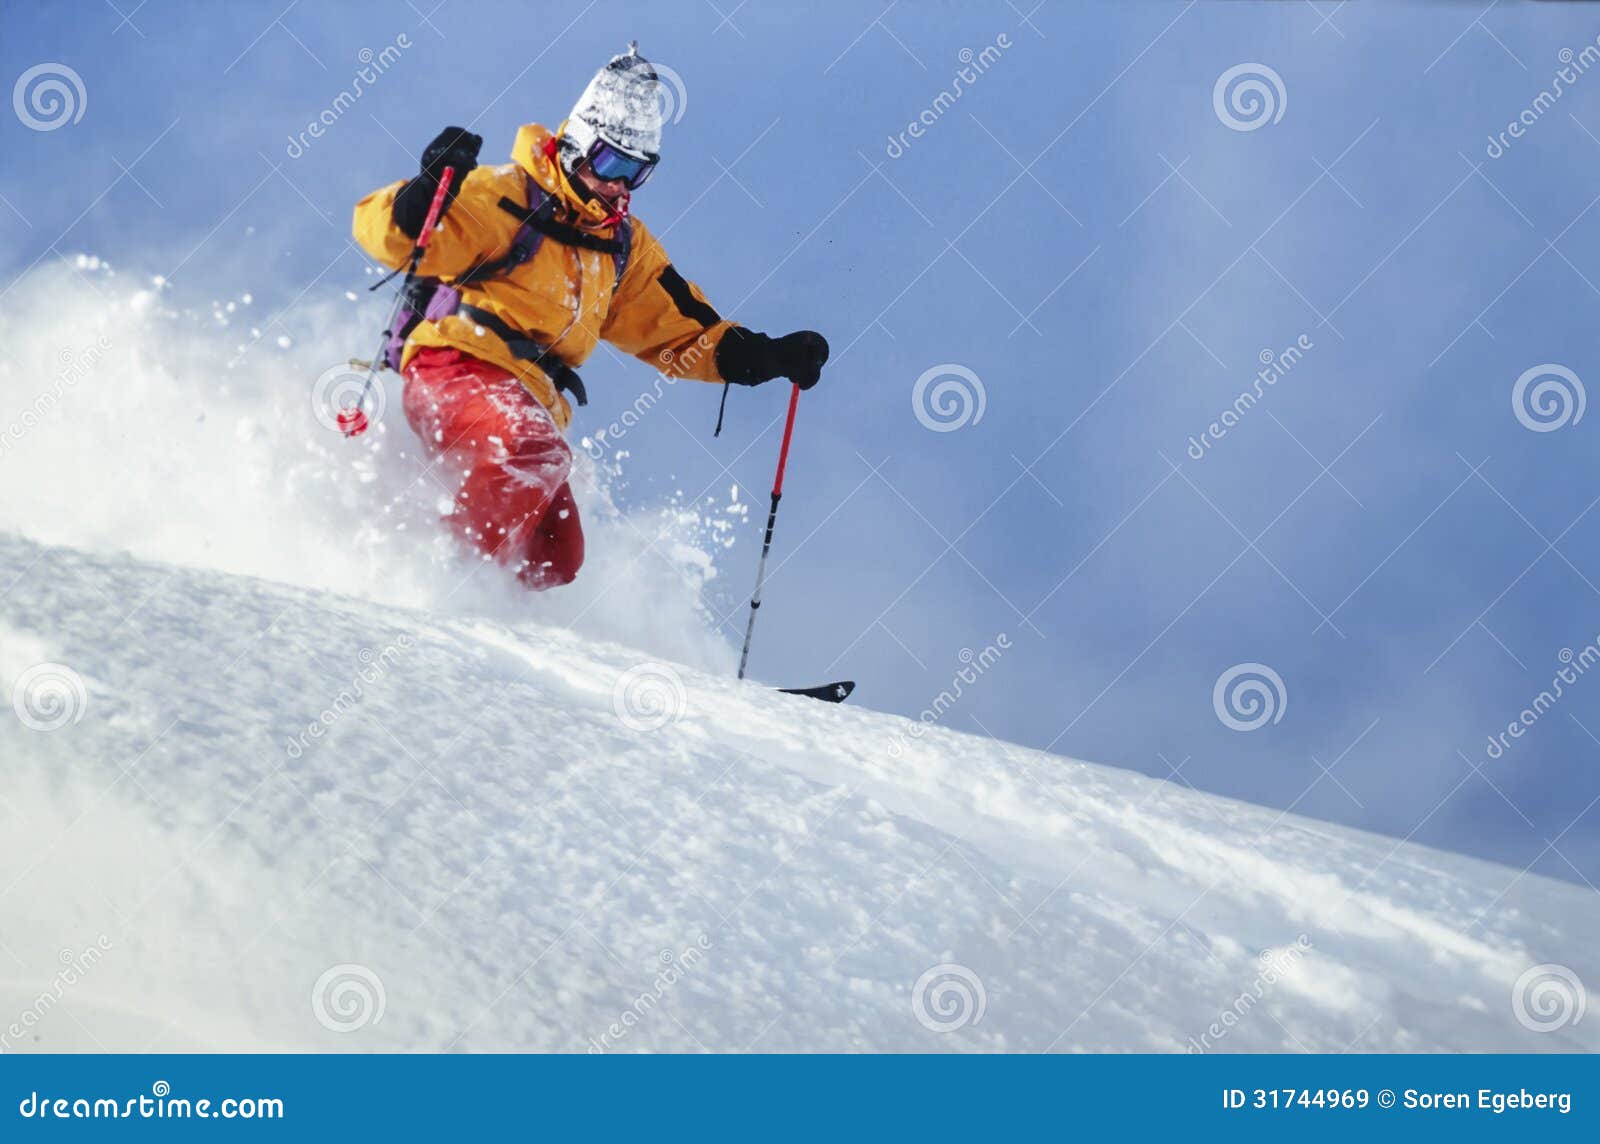 Man Skiing Powder Snow In Austria Royalty Free Stock Images - Image ...